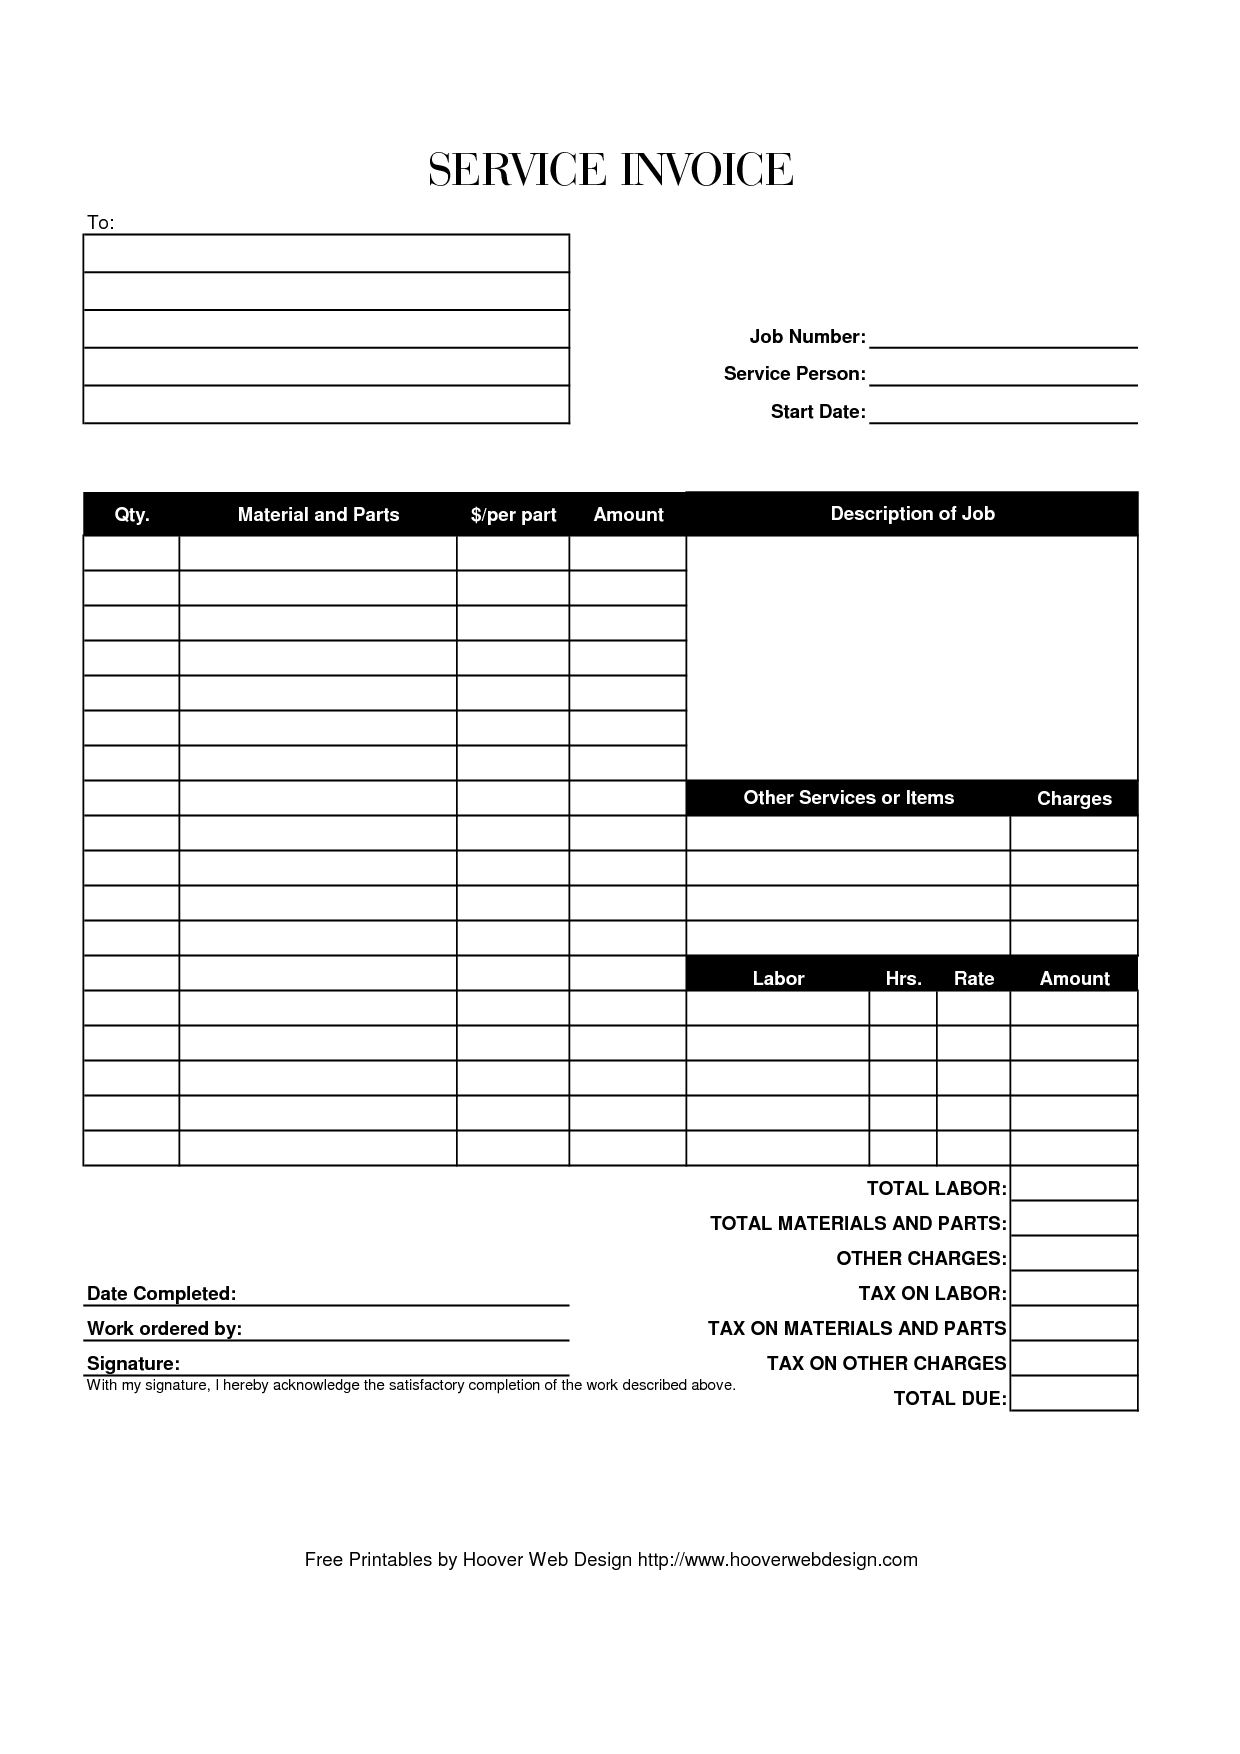 hoover receipts free printable service invoice template free invoice templates printable free